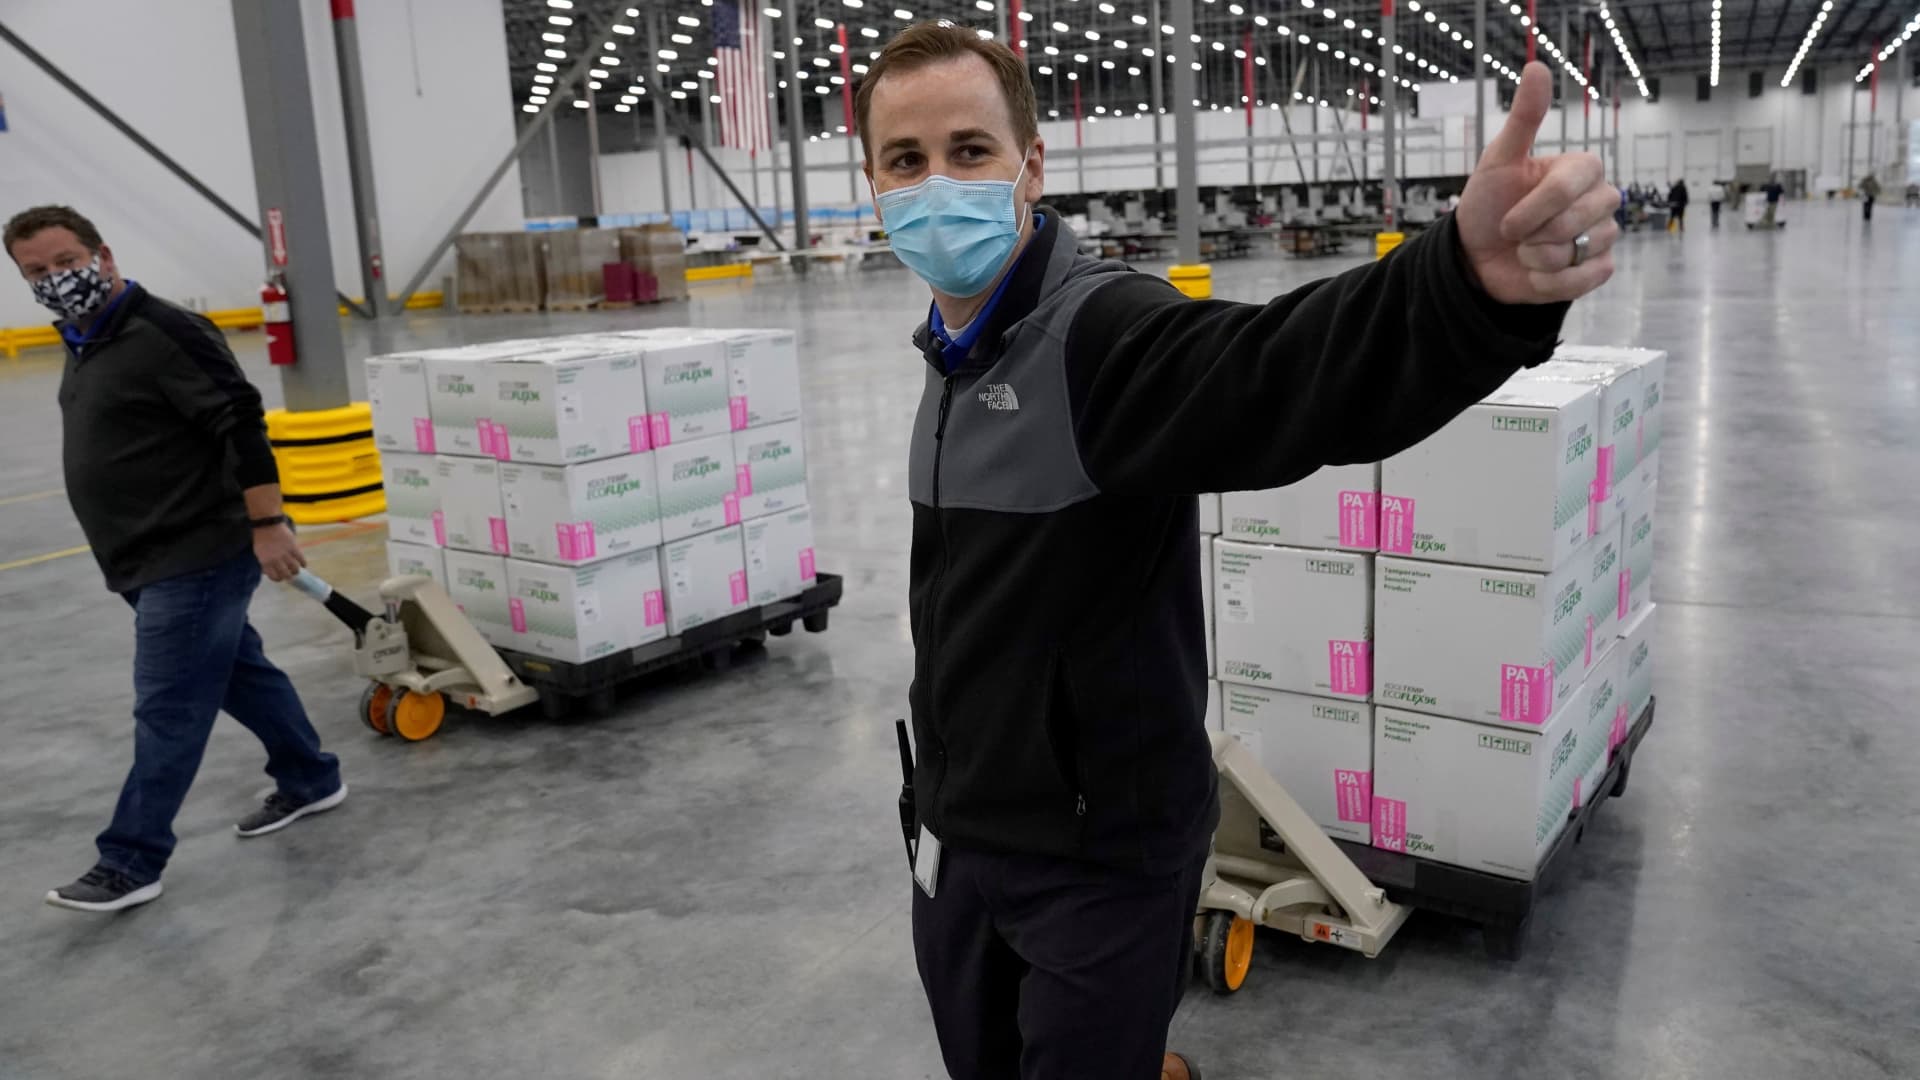 Boxes containing the Moderna COVID-19 vaccine are prepared to be shipped at the McKesson distribution center in Olive Branch, Mississippi, U.S. December 20, 2020.